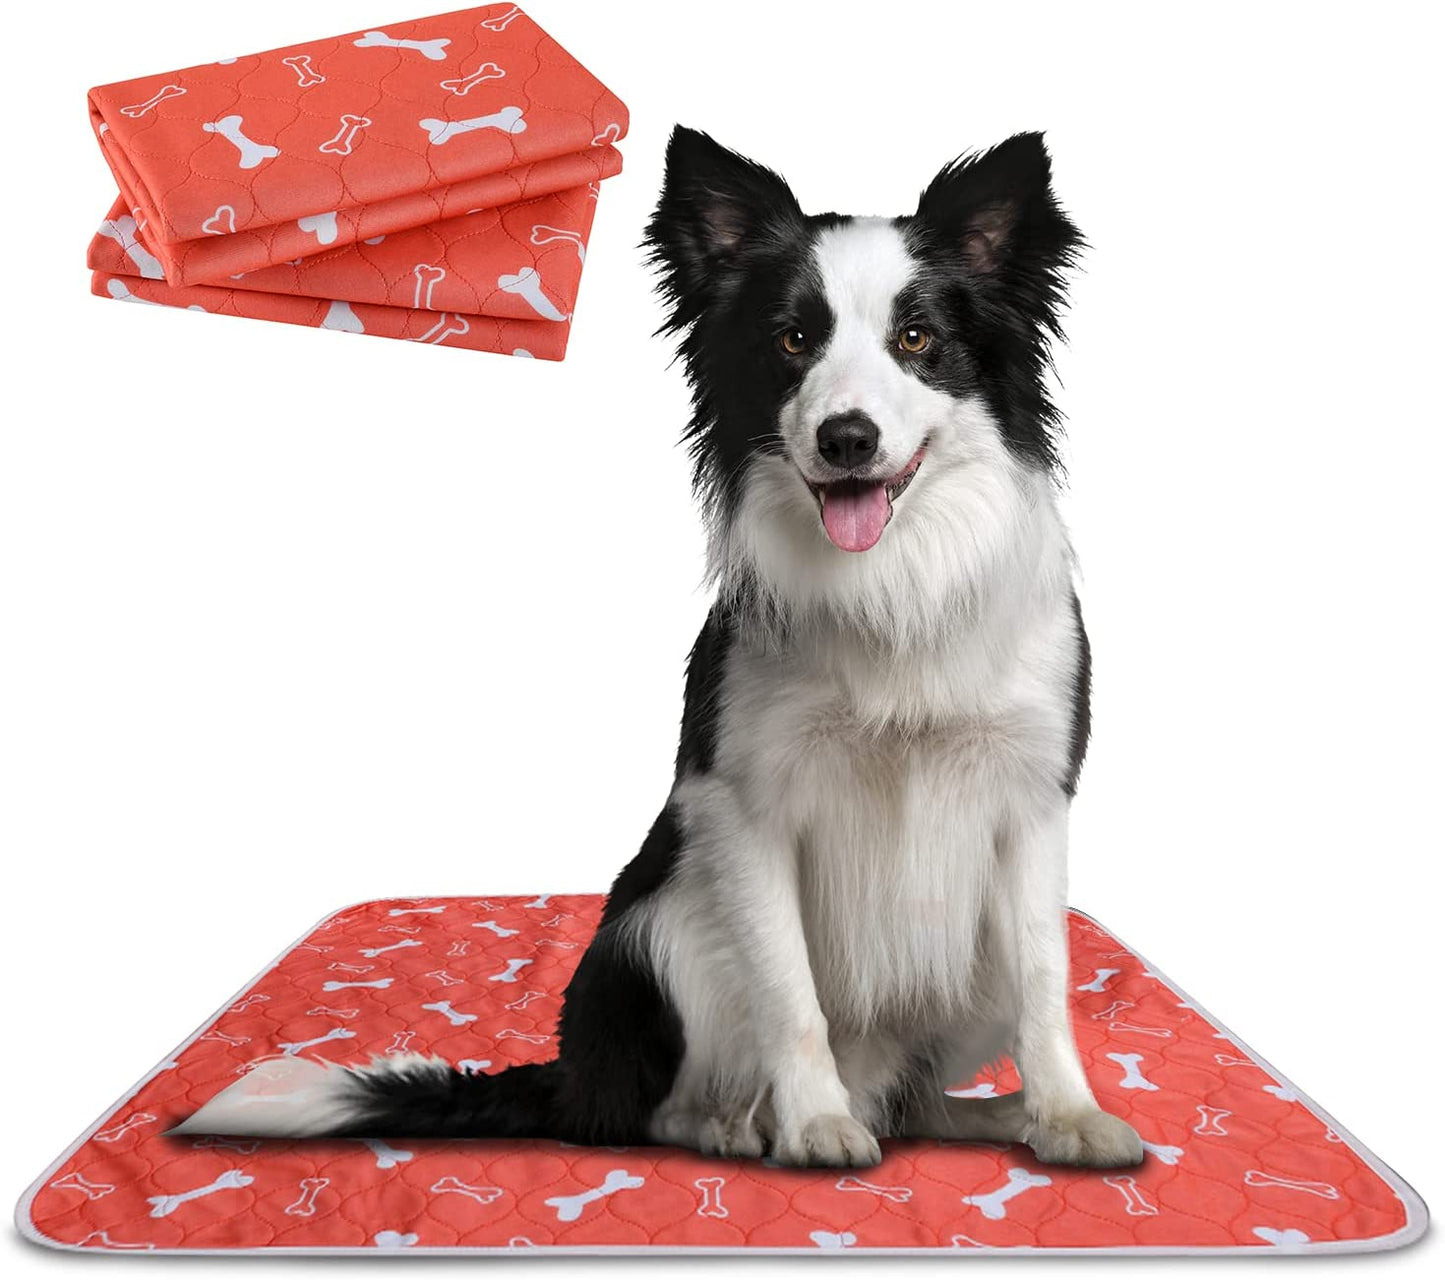 The Proper Pet Washable Pee Pads for Dogs, Reusable Puppy Pads 2 Pack - Easy to Clean, Waterproof Dog Mat, Puppy Mat - Reusable Dog Pee Pads - Washable Potty Pads for Dogs - Reusable Pee Pads for Dogs